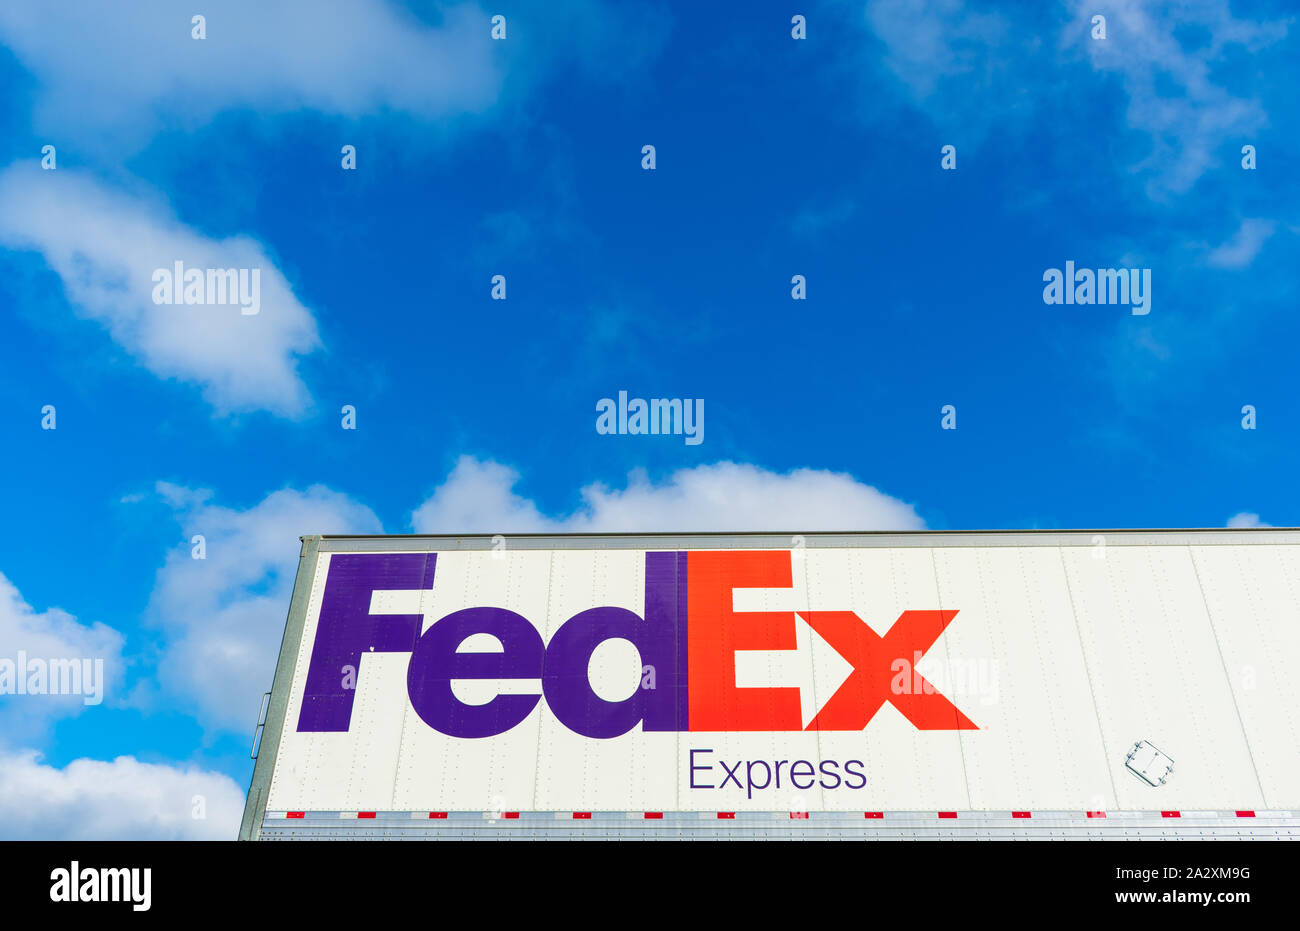 FedEx Express sign on the side of FedEx Corporation delivery truck parked outdoors under blue sky with light clouds Stock Photo